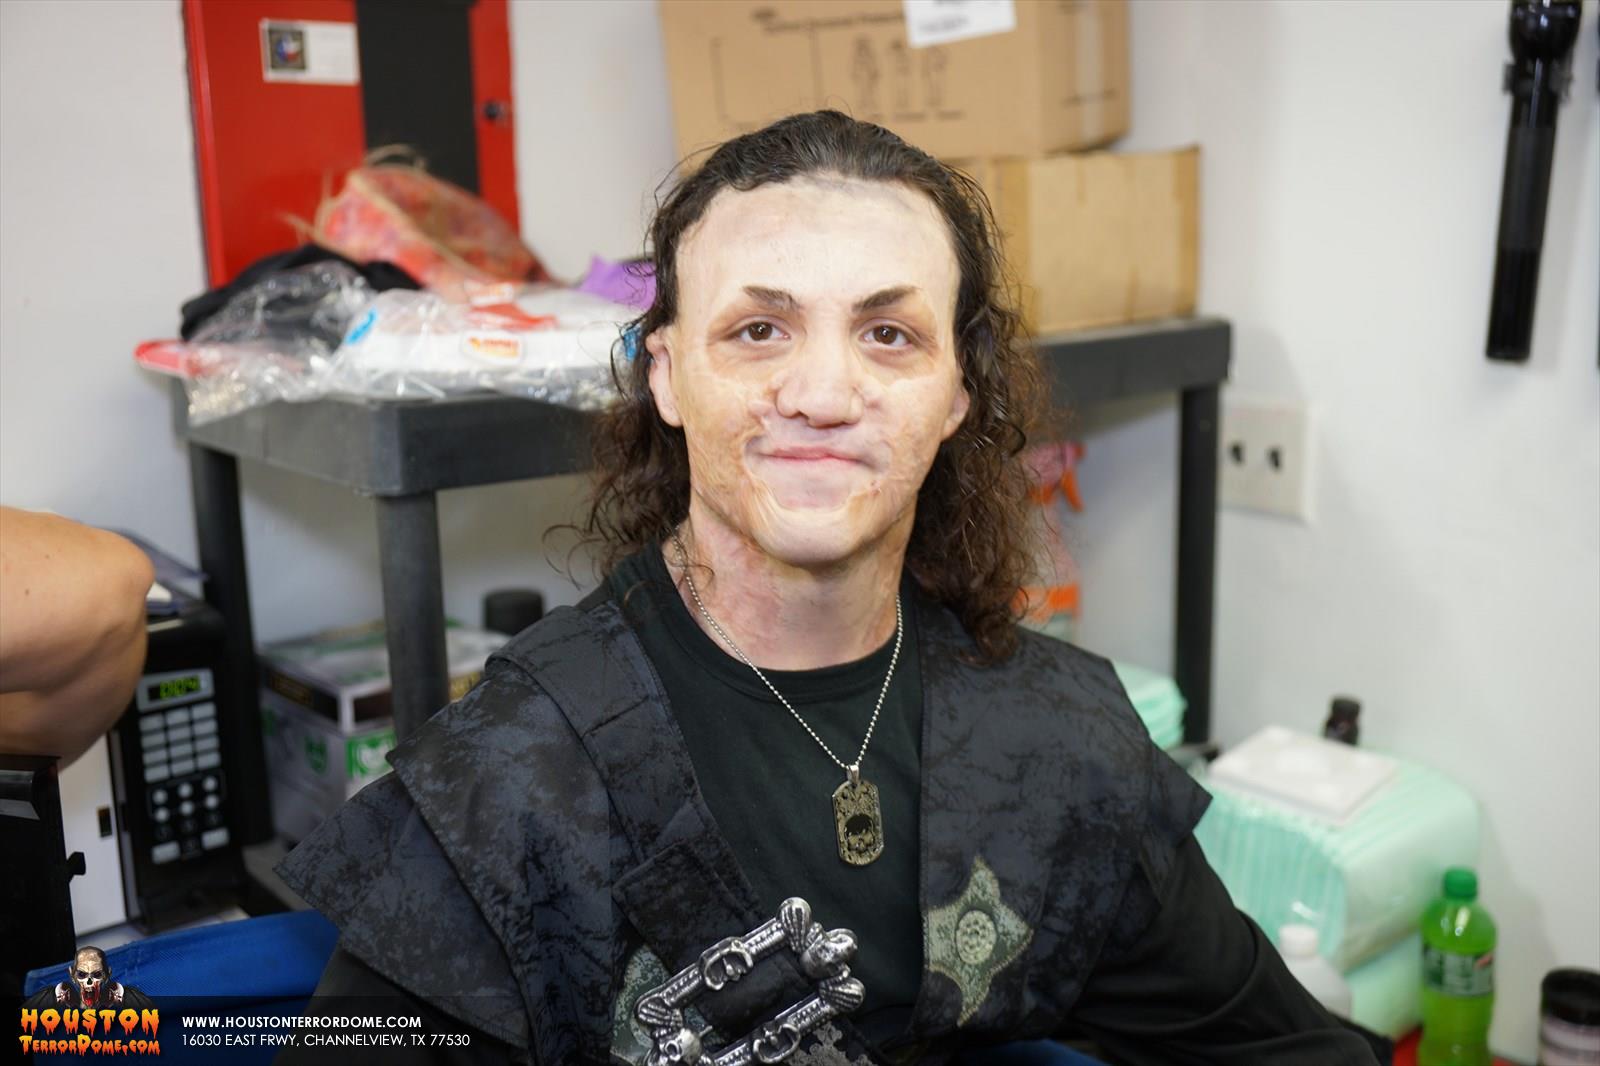 Joker Character after foam prosthetics, but before face painting